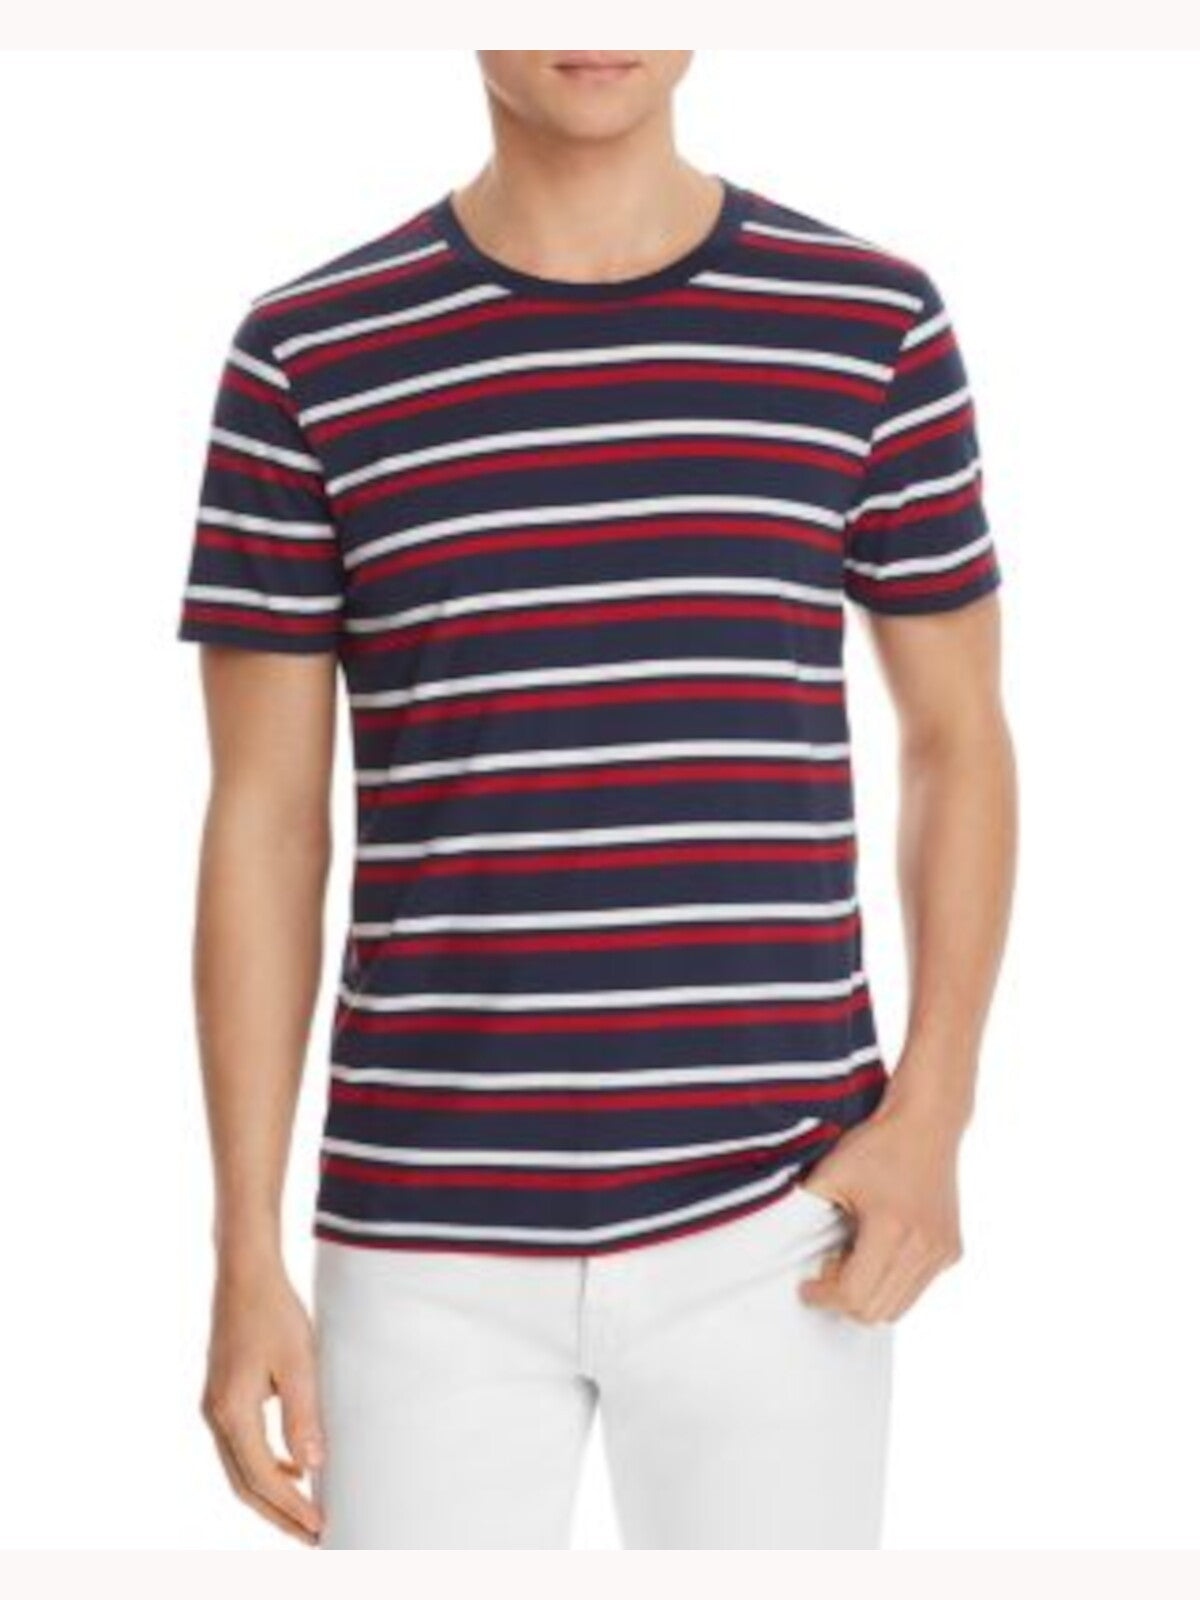 Pacific and Park Mens Navy Striped T-Shirt S